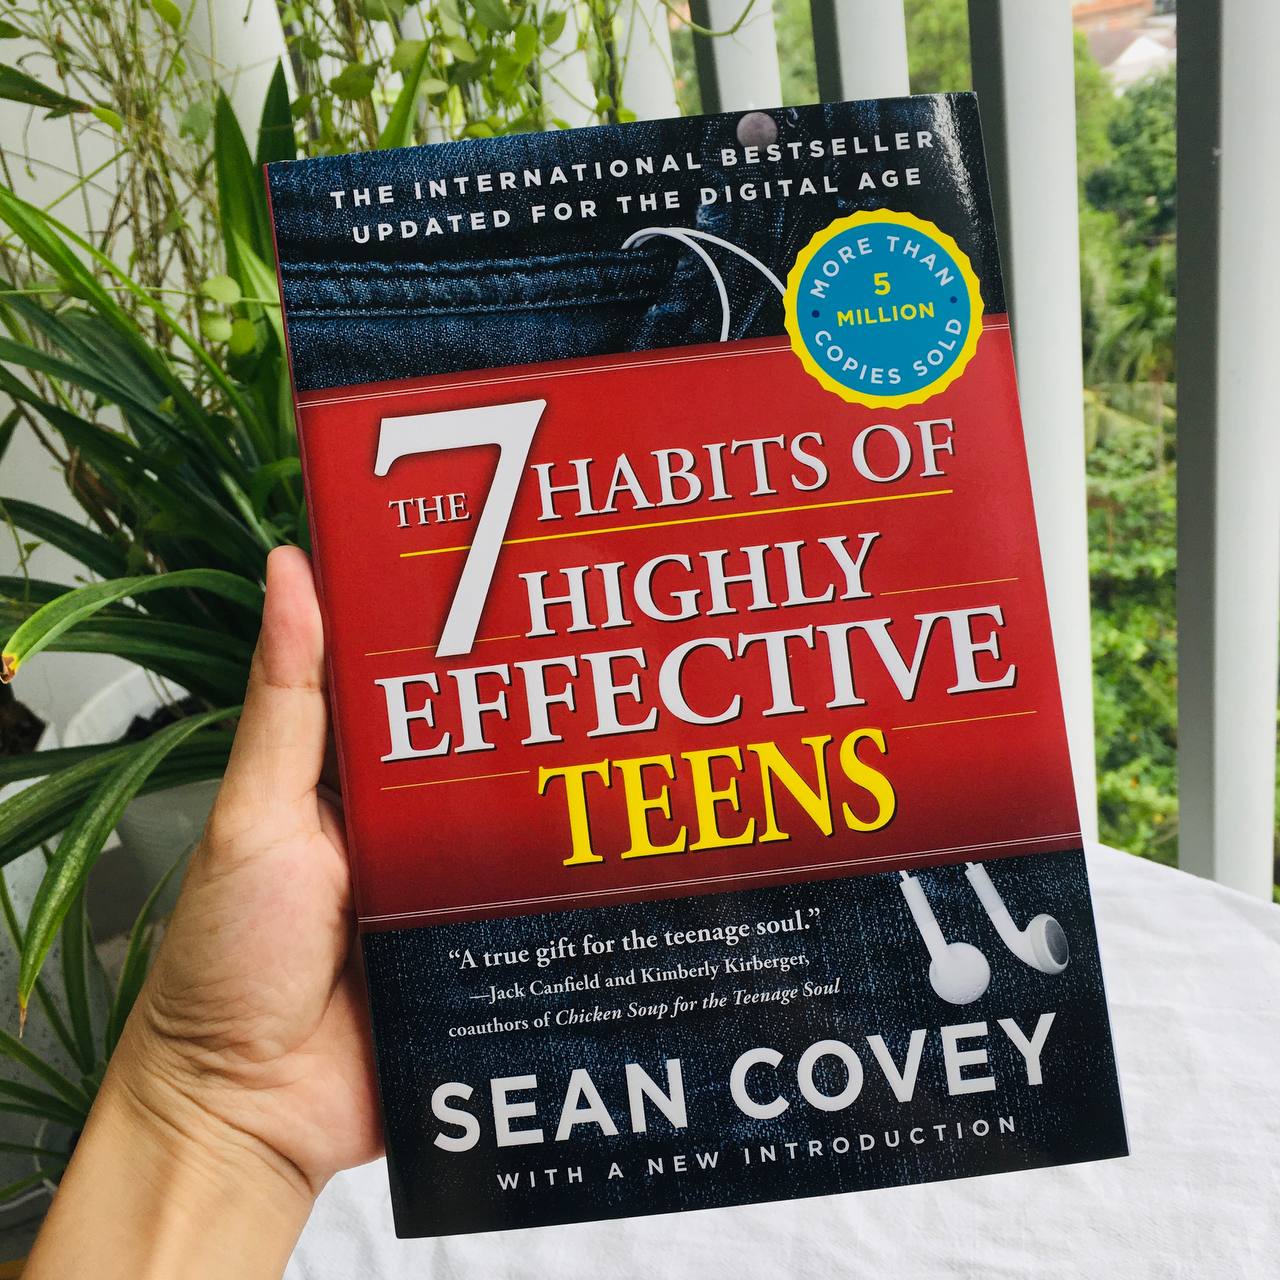 Book The 7 Habits of Highly Effective Teens by Sean Covey